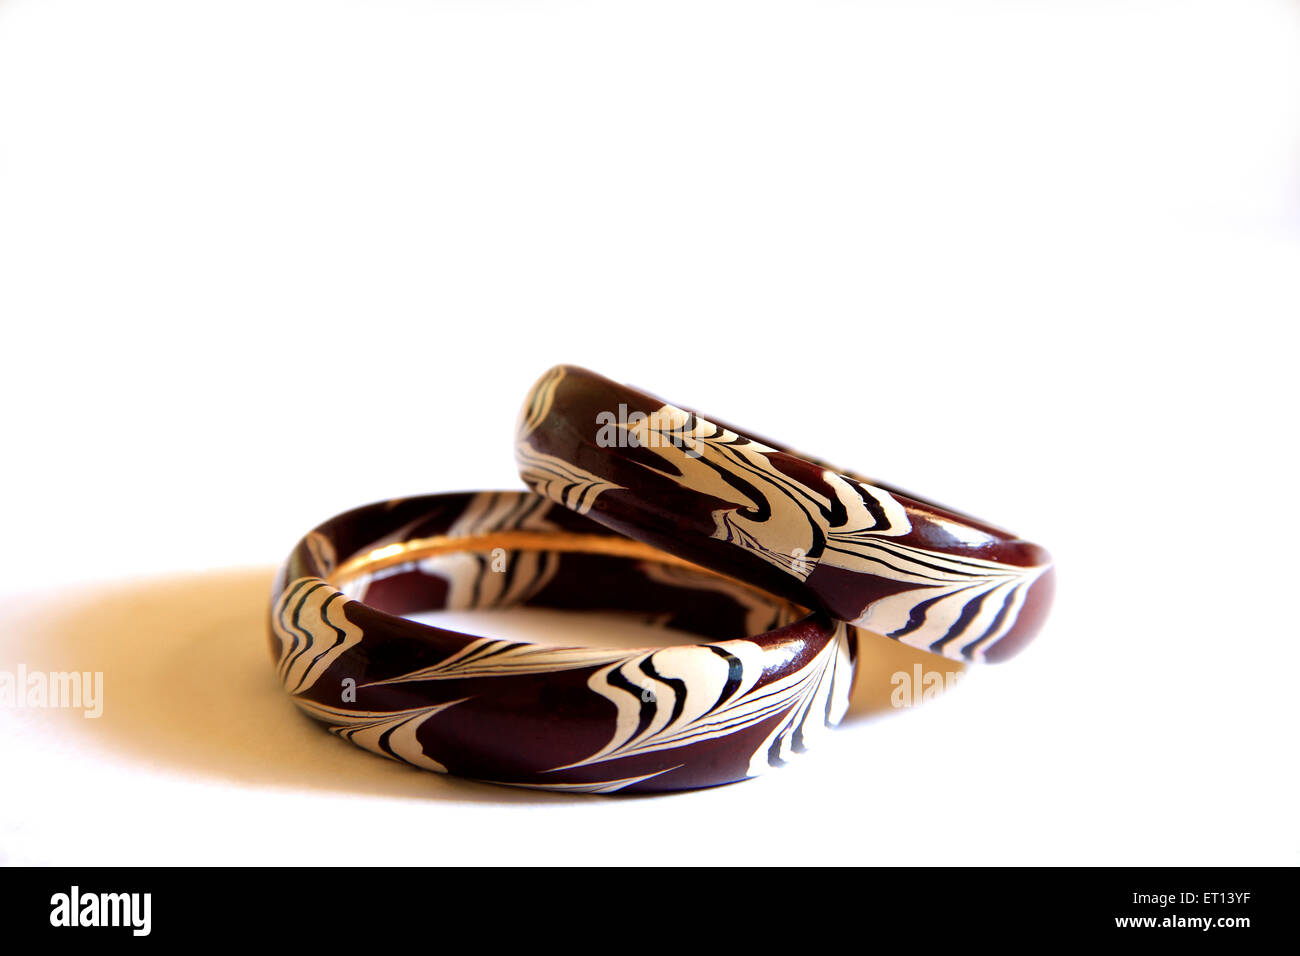 Colorful wooden bangles on white background Stock Photo